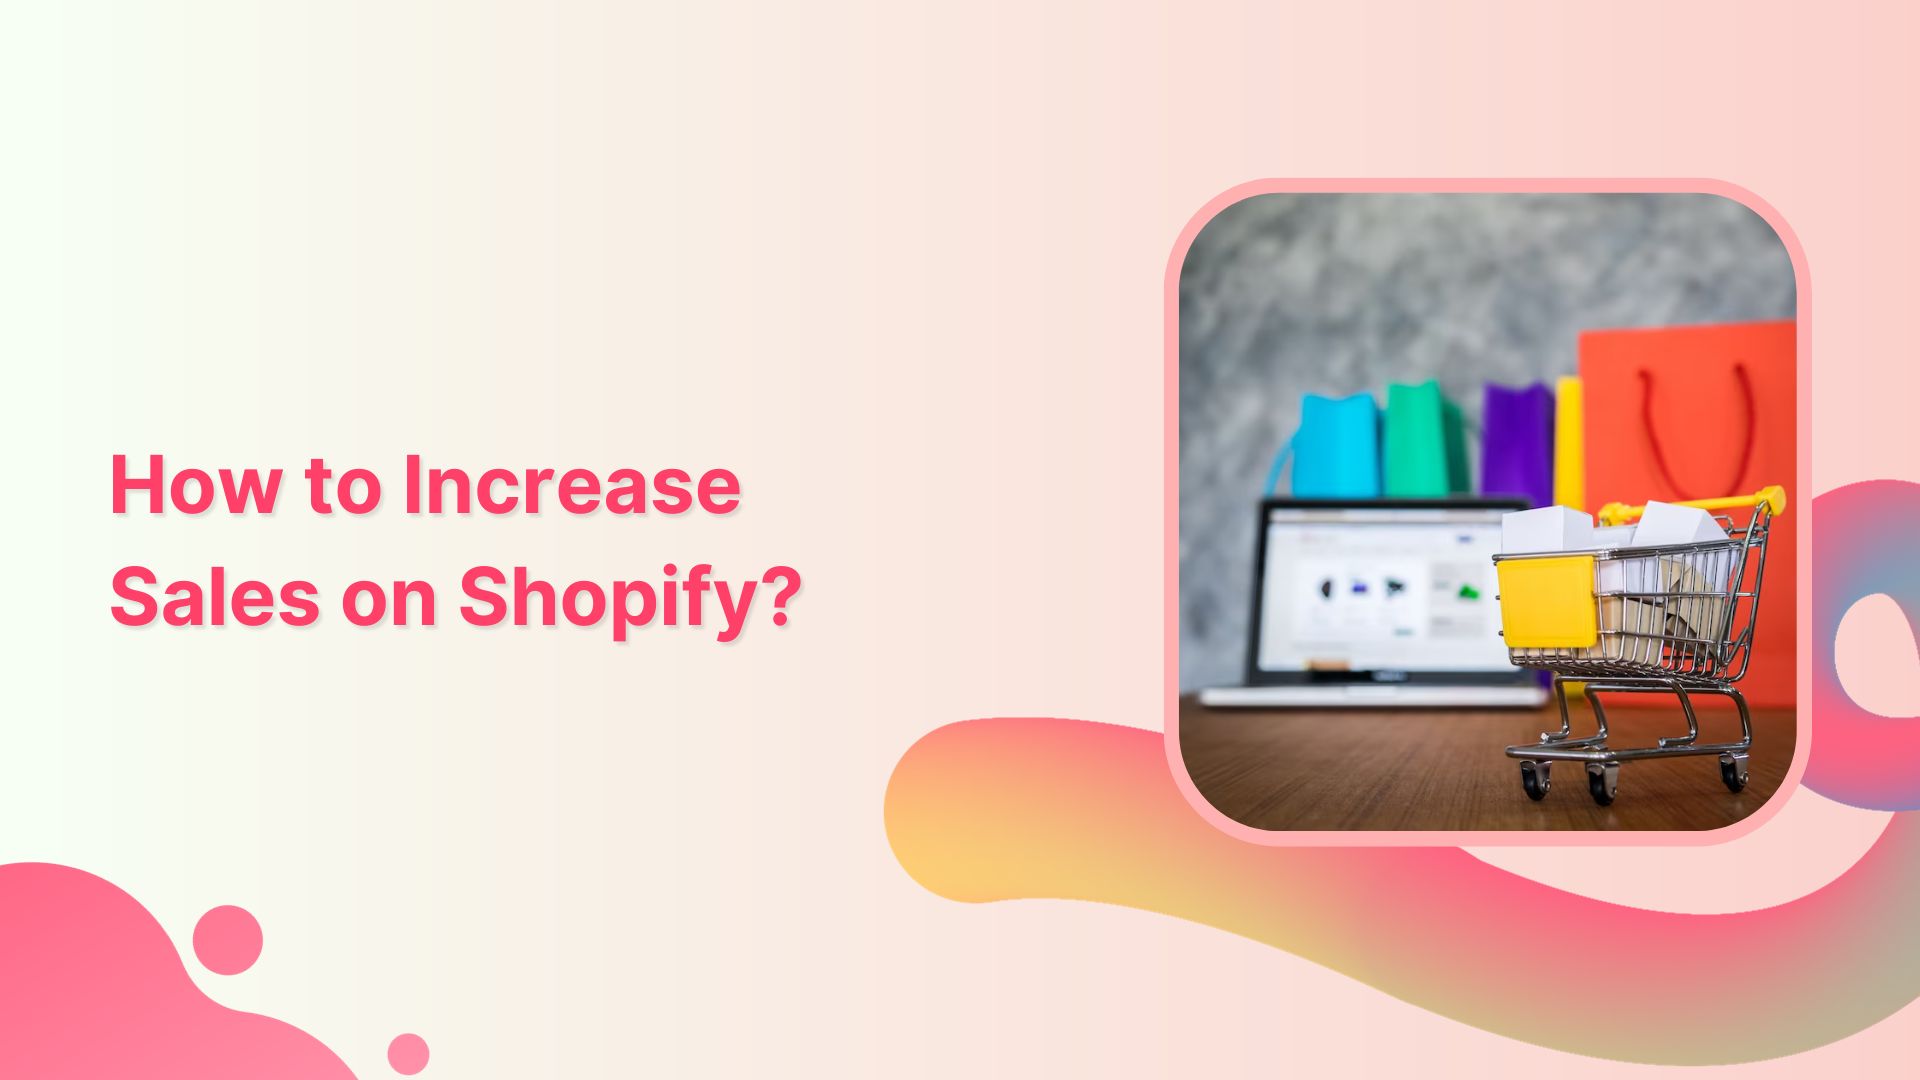 How to Increase Sales on Shopify: 17 Winning Strategies